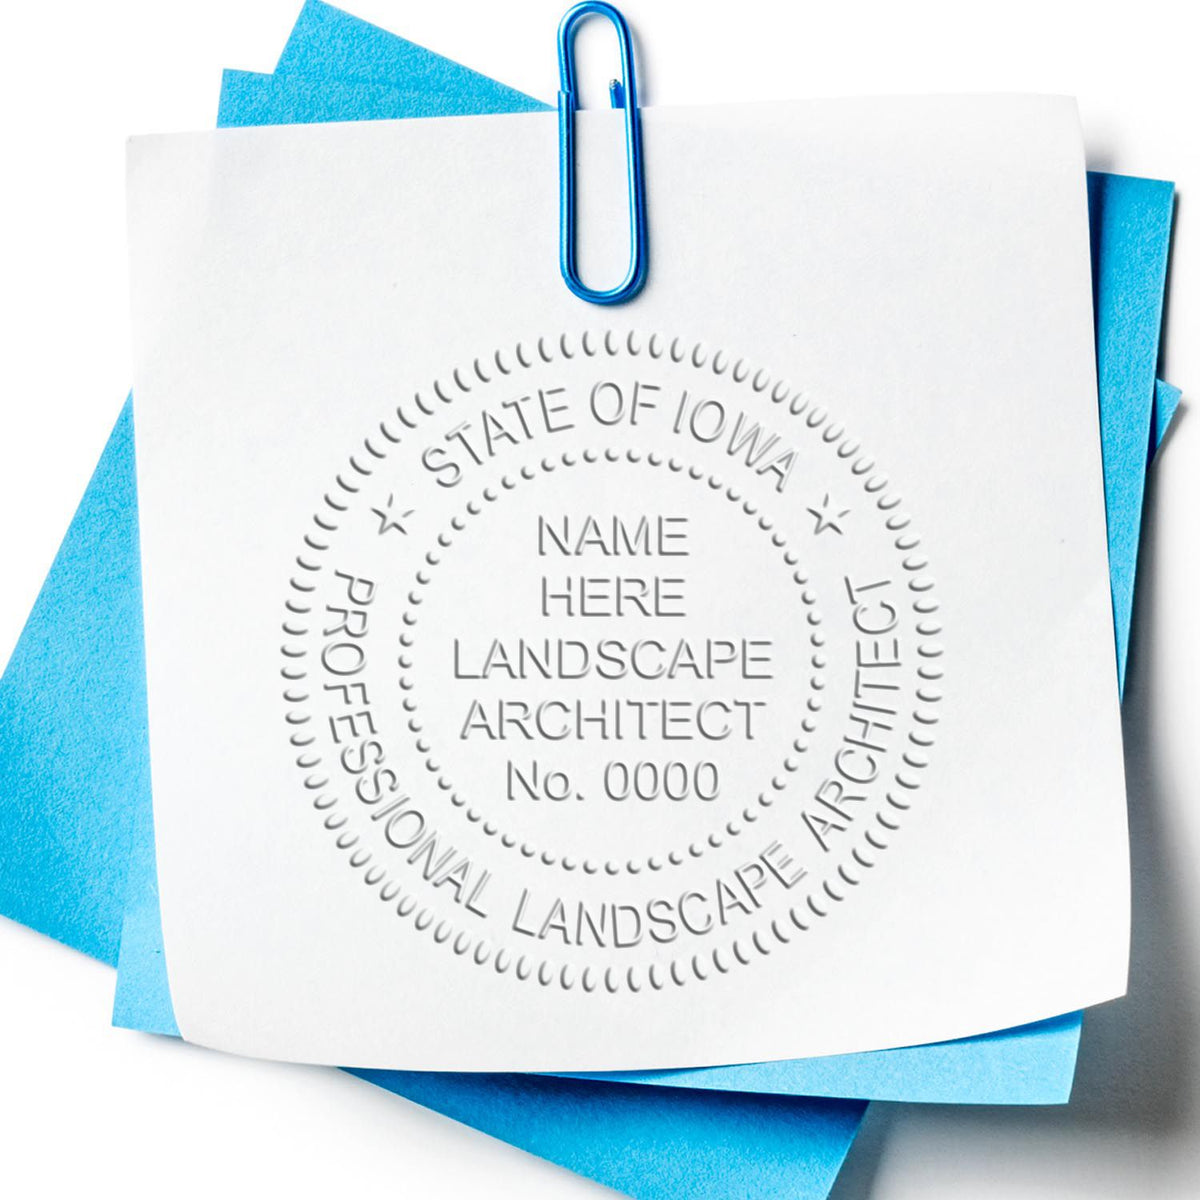 A stamped imprint of the Gift Iowa Landscape Architect Seal in this stylish lifestyle photo, setting the tone for a unique and personalized product.